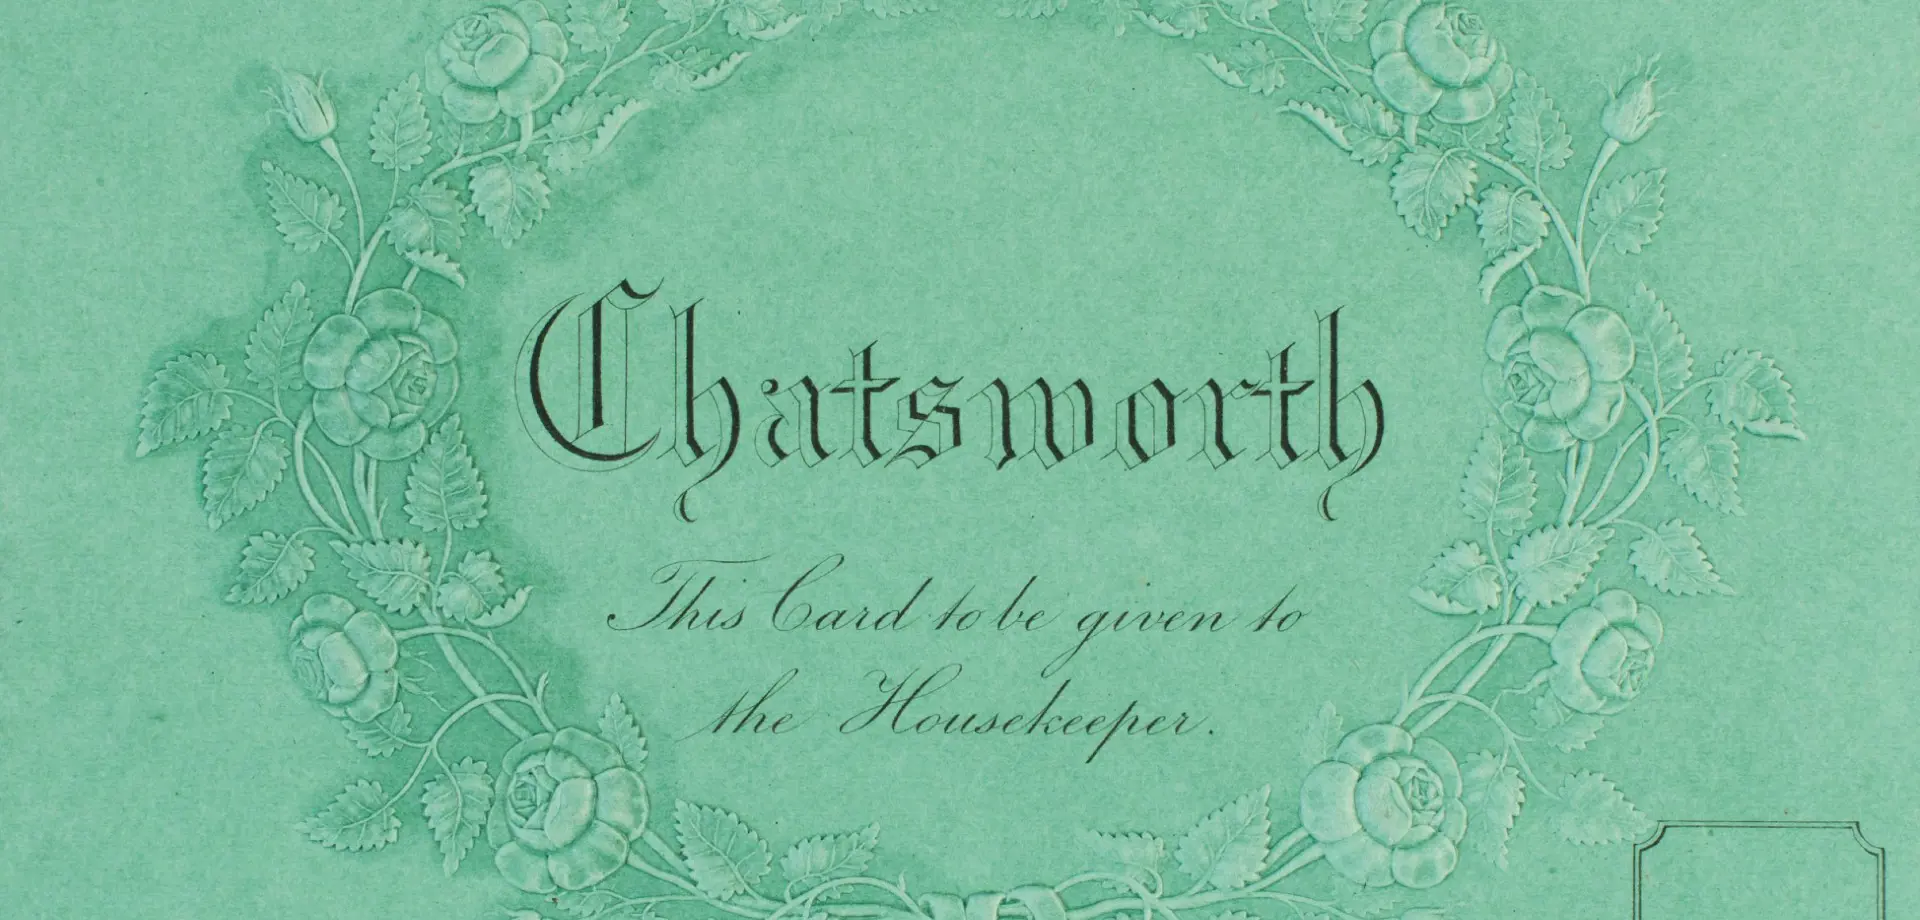 Elizabeth Gaskell’s visit to Chatsworth in 1857